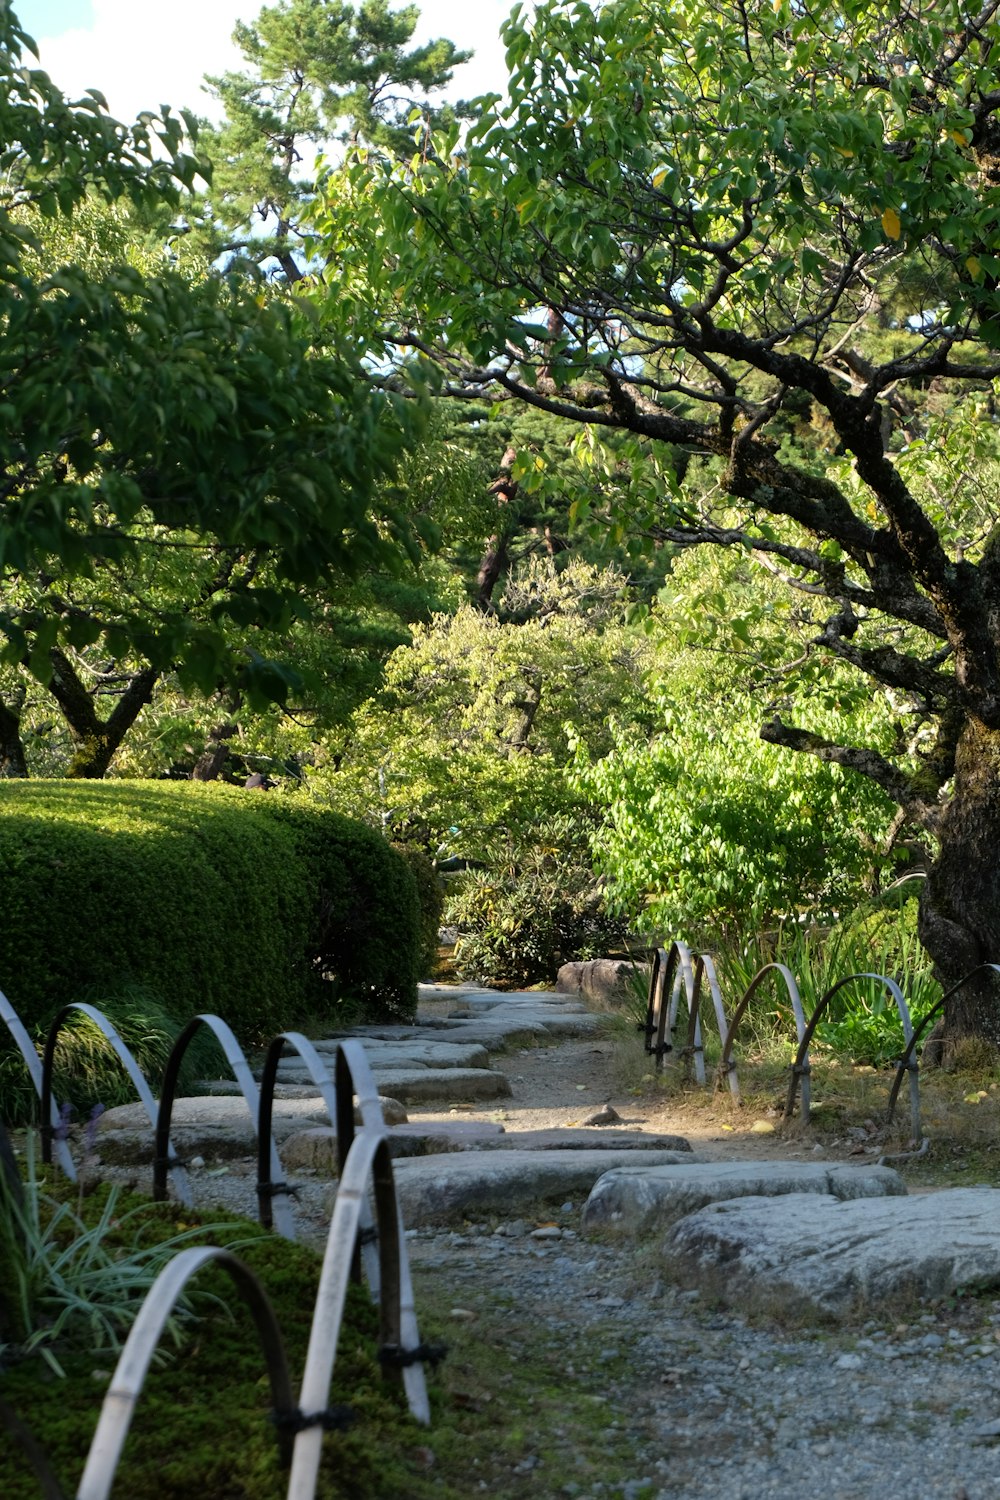 a path in a park with trees and bushes